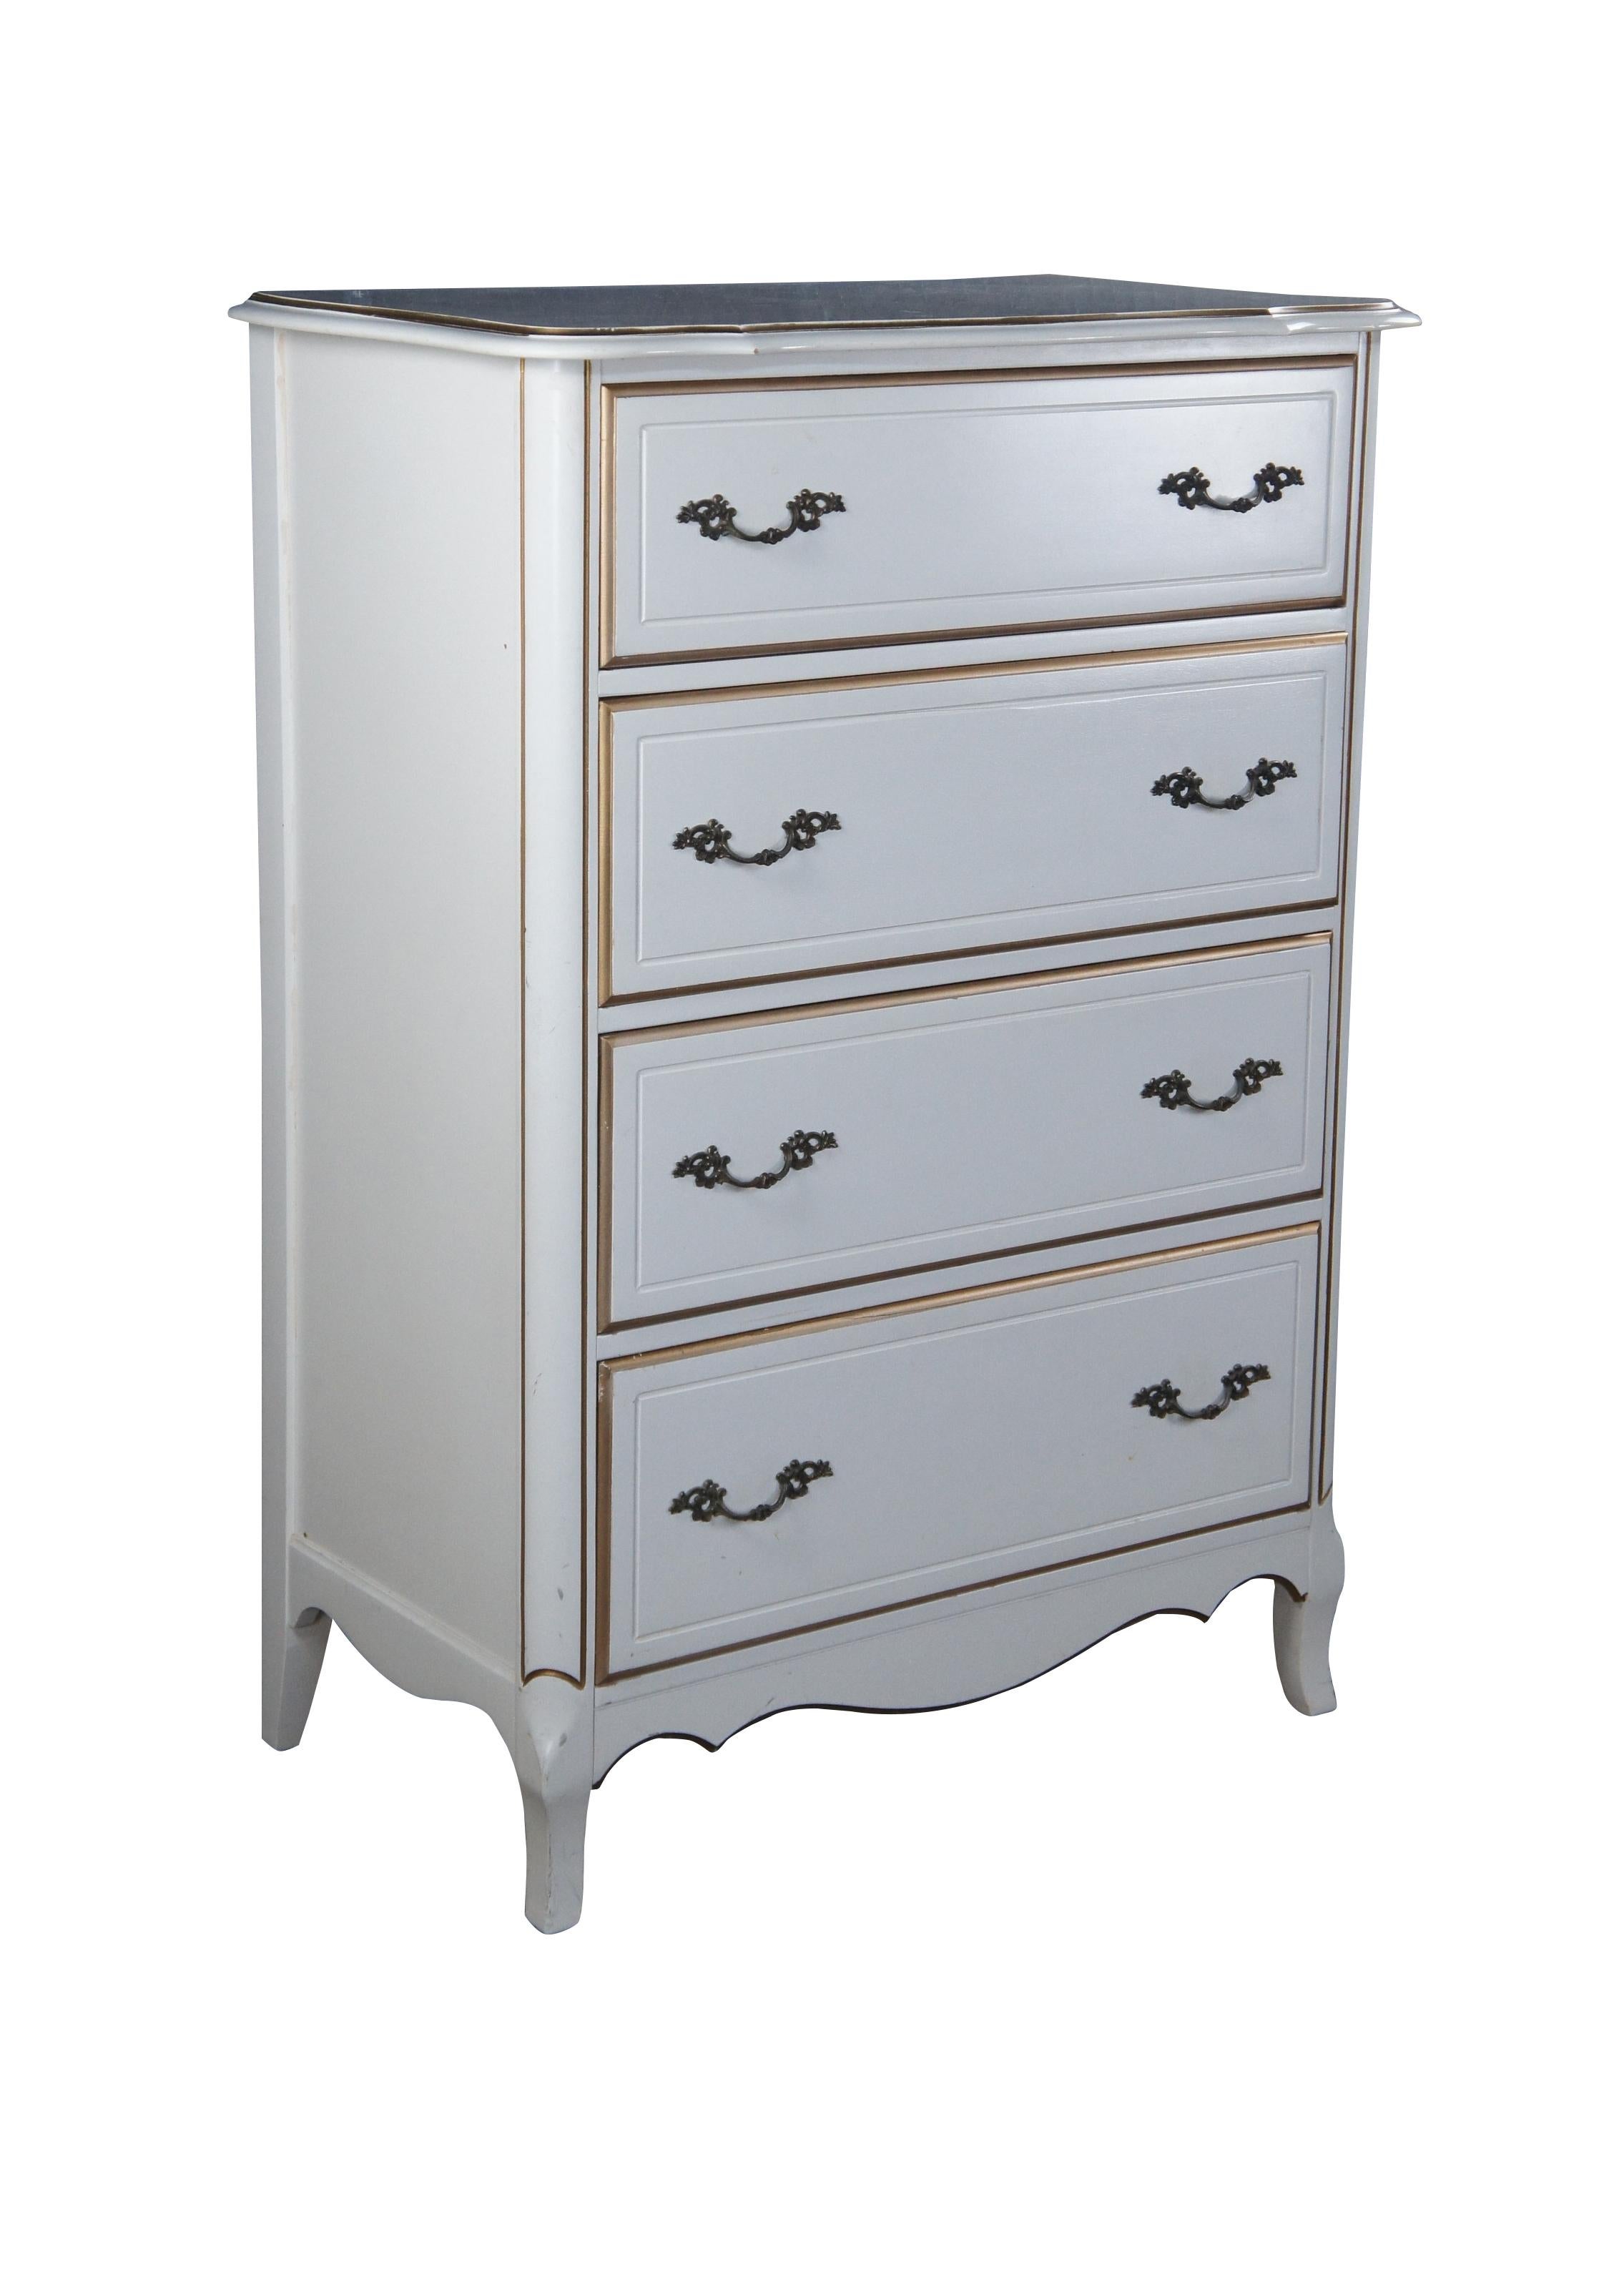 Mid century French Provincial dresser or chest or drawers featuring rectangular form with serpentine edges and white and gold accents.  7065-40, 745-H-62

Dimensions:
19